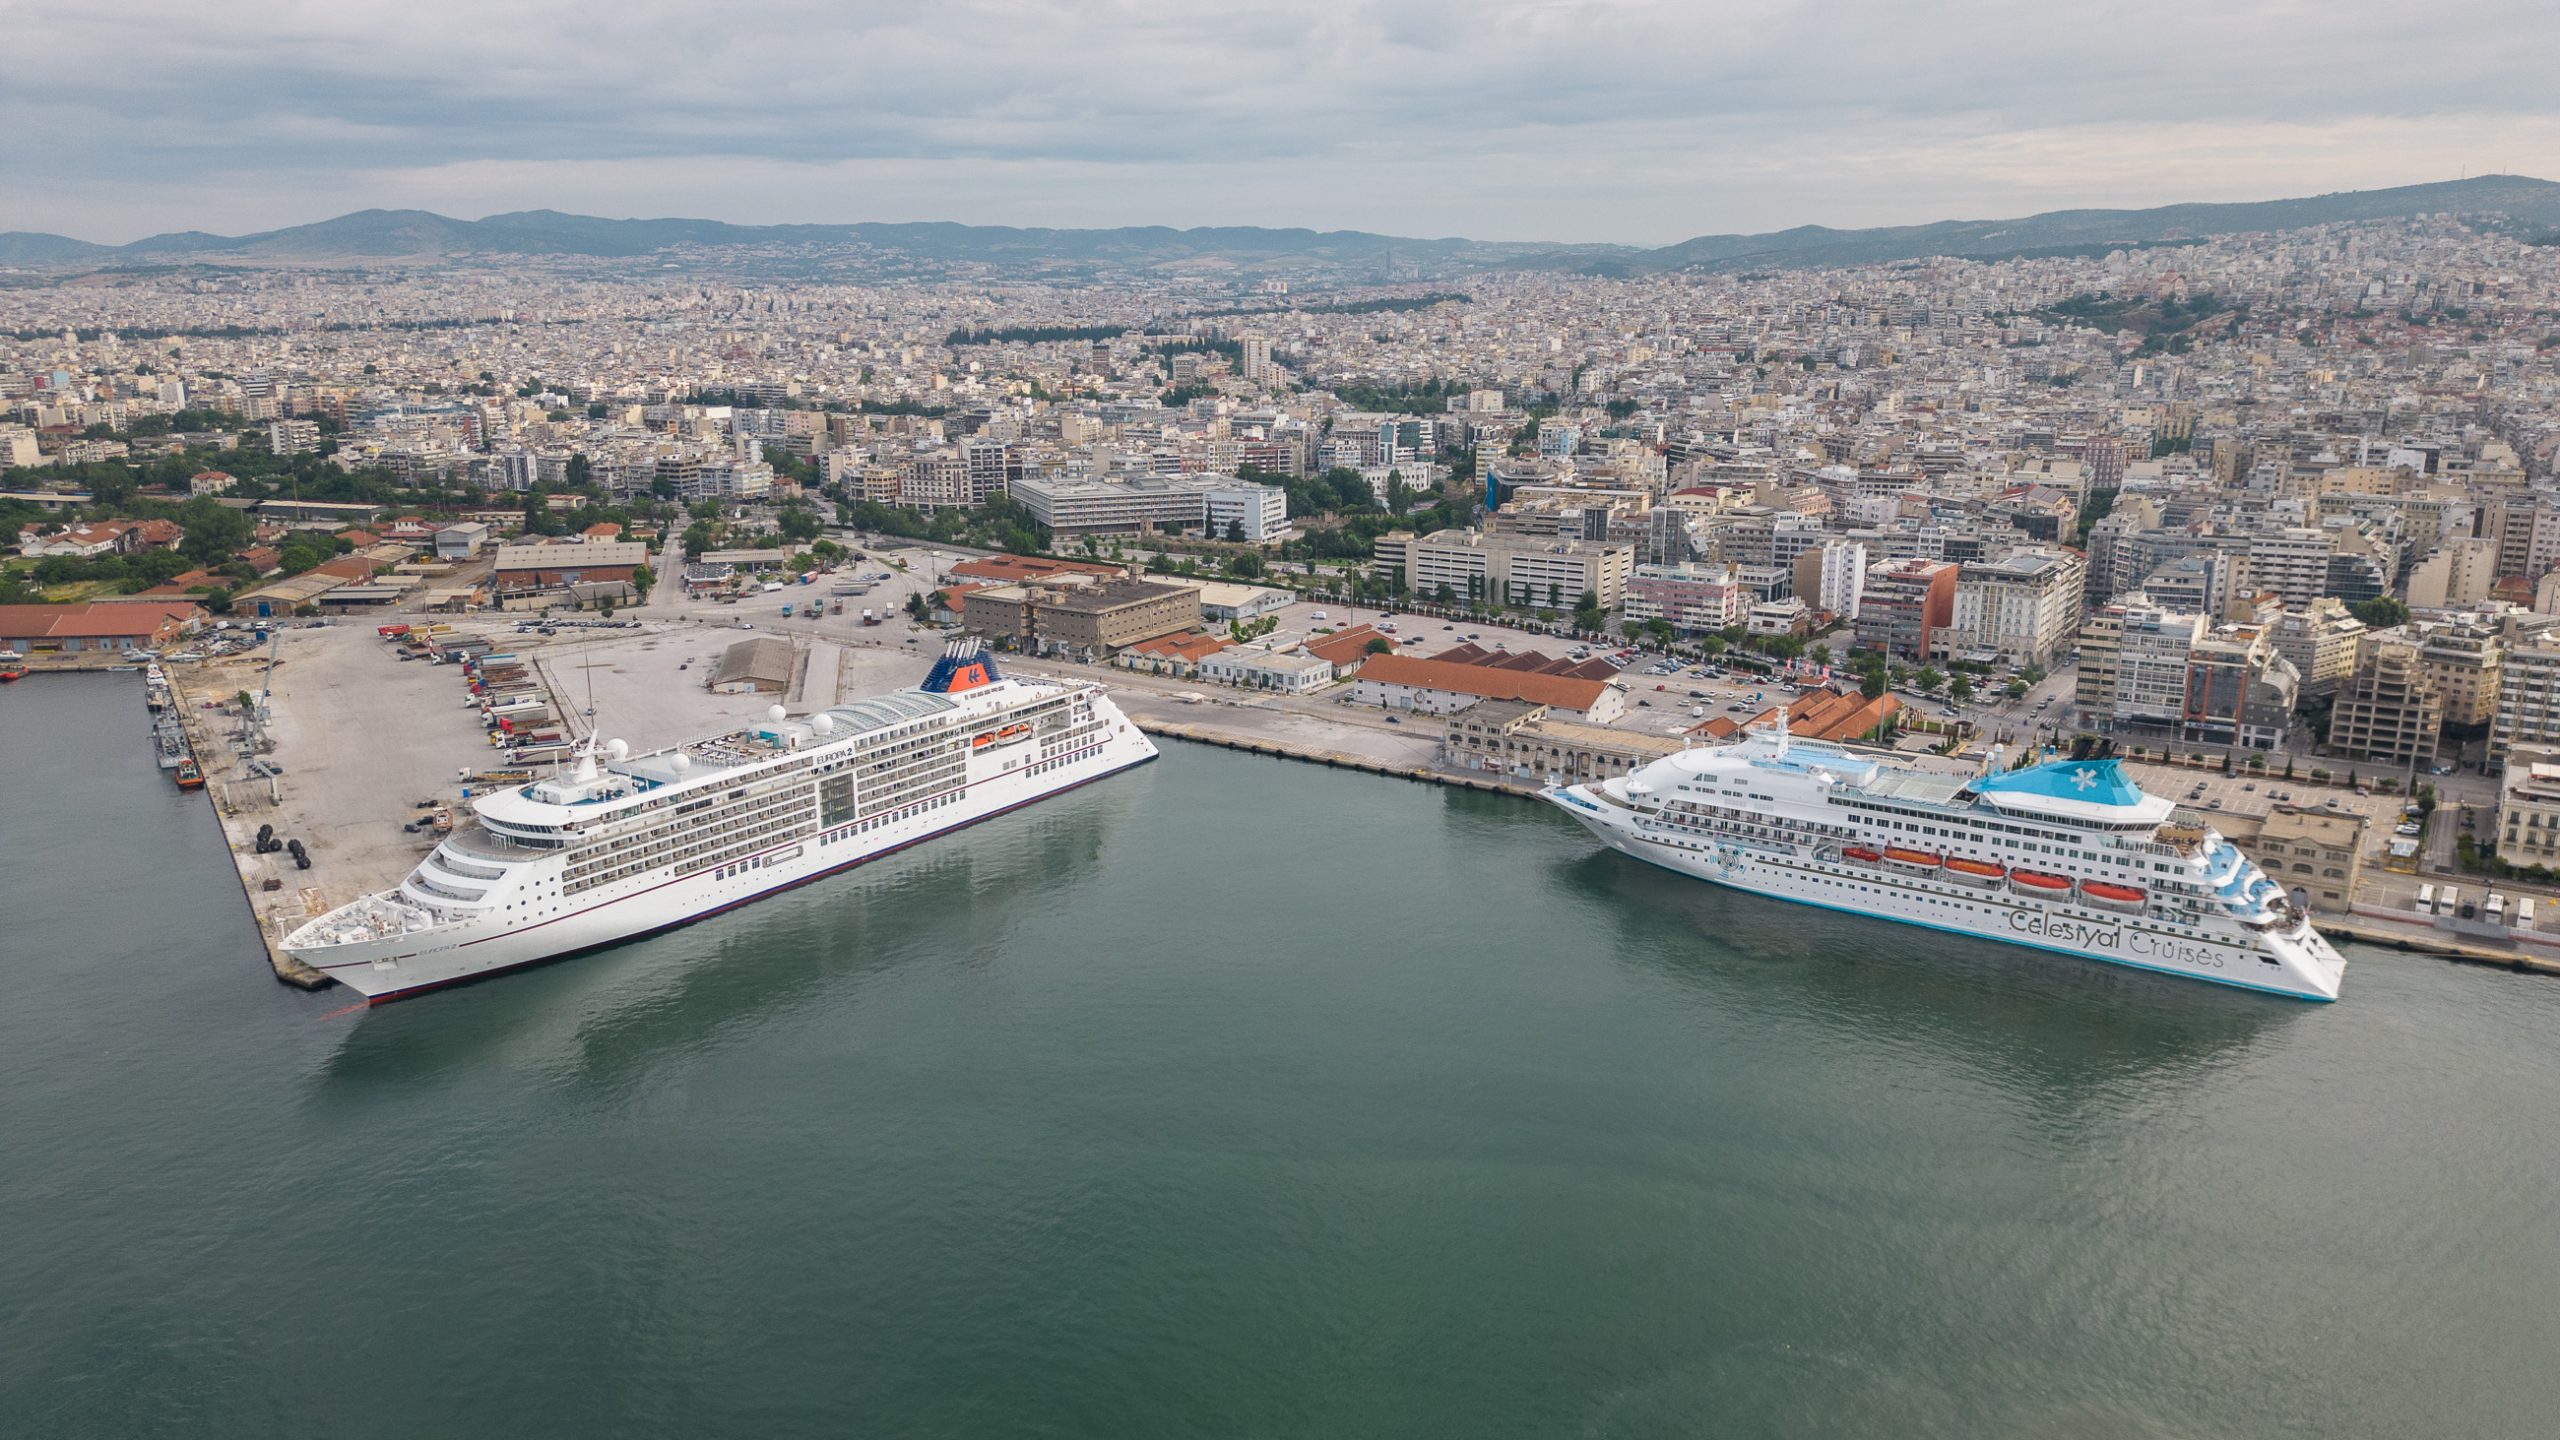 Operations Commenced at the 2nd Passenger Terminal of the Port of Thessaloniki